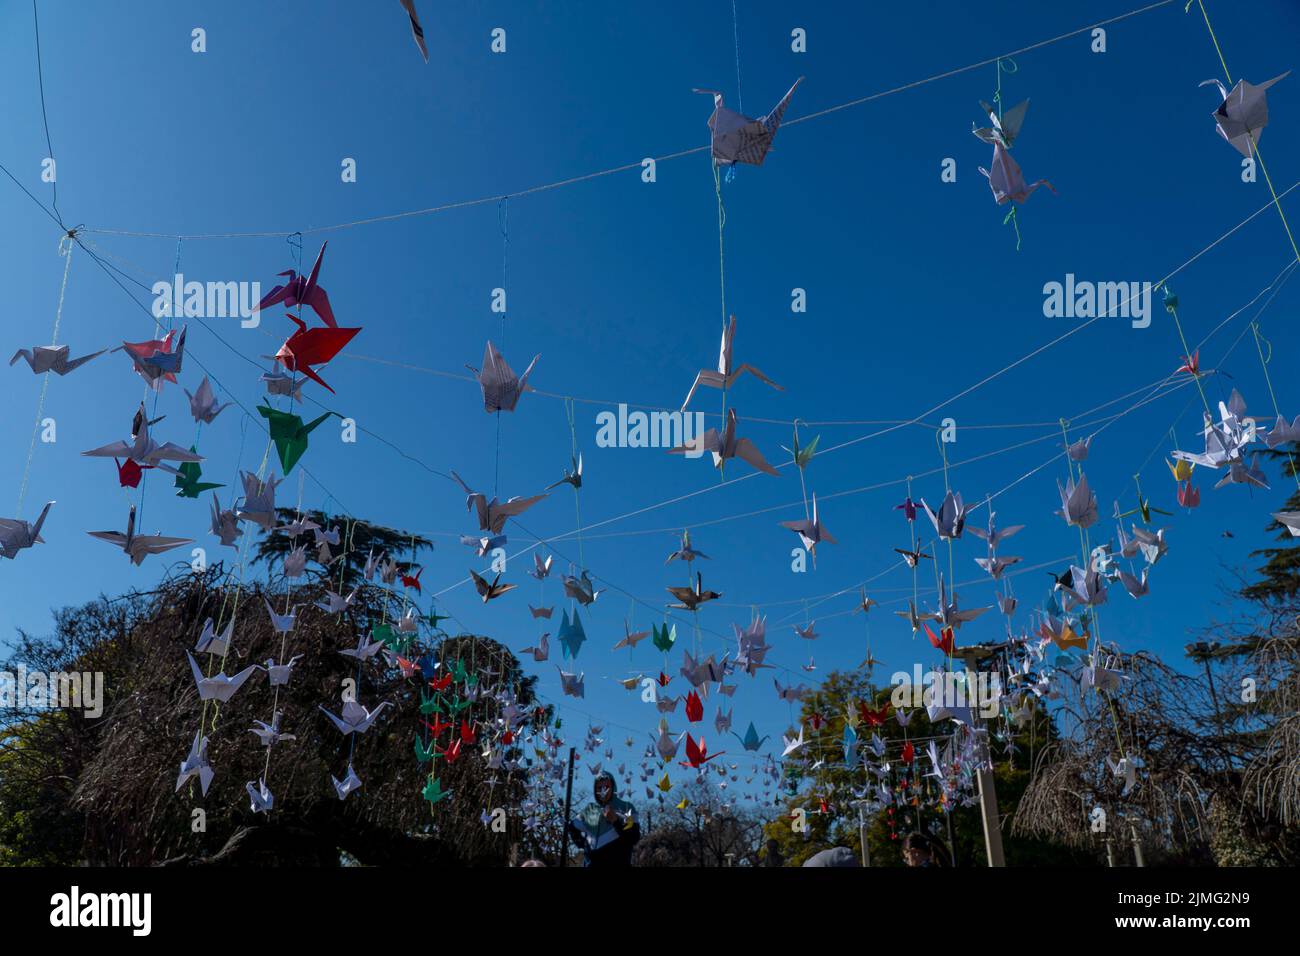 A thousand origami cranes seen hanging during 'A Day for Peace' event marking the 77th anniversary of the atomic bombing of Hiroshima by the USA. Stock Photo